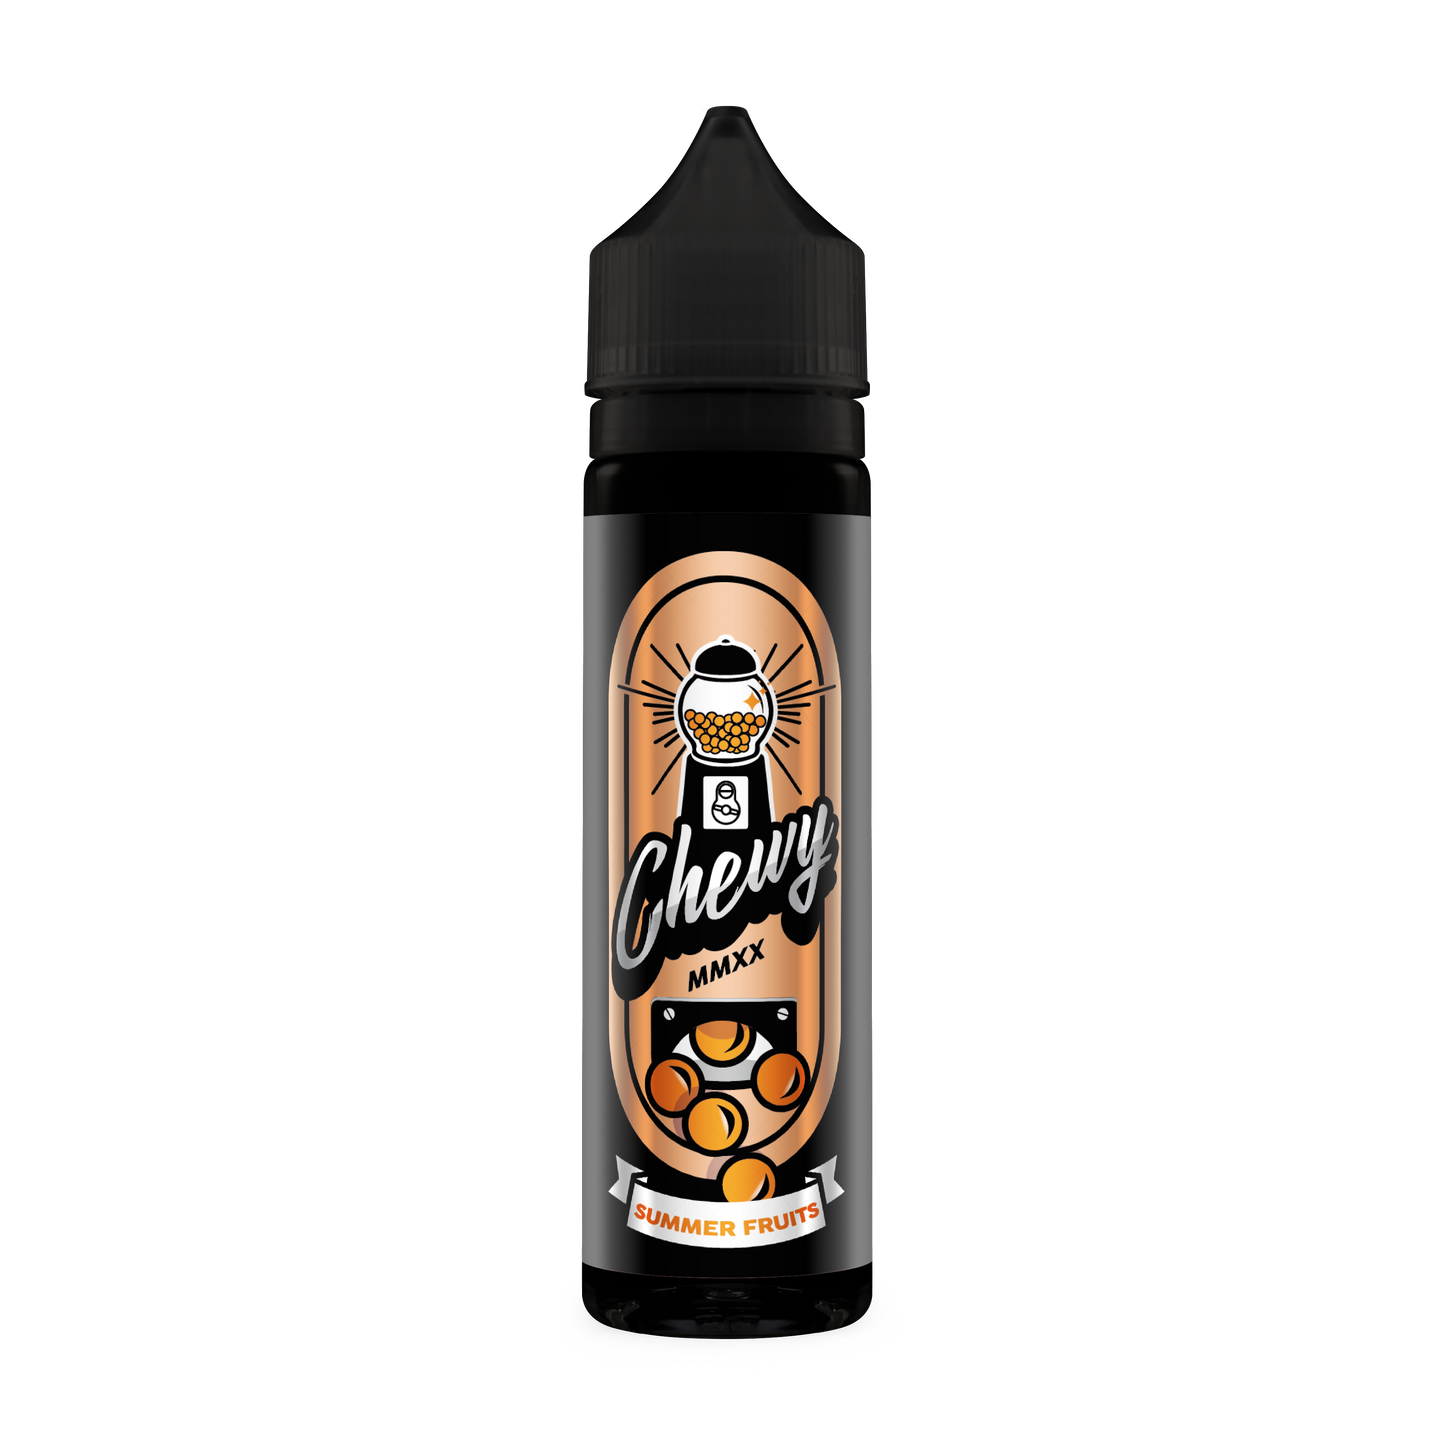 Chewy - Summer Fruits Bubblegum 50ml - The Ace Of Vapez